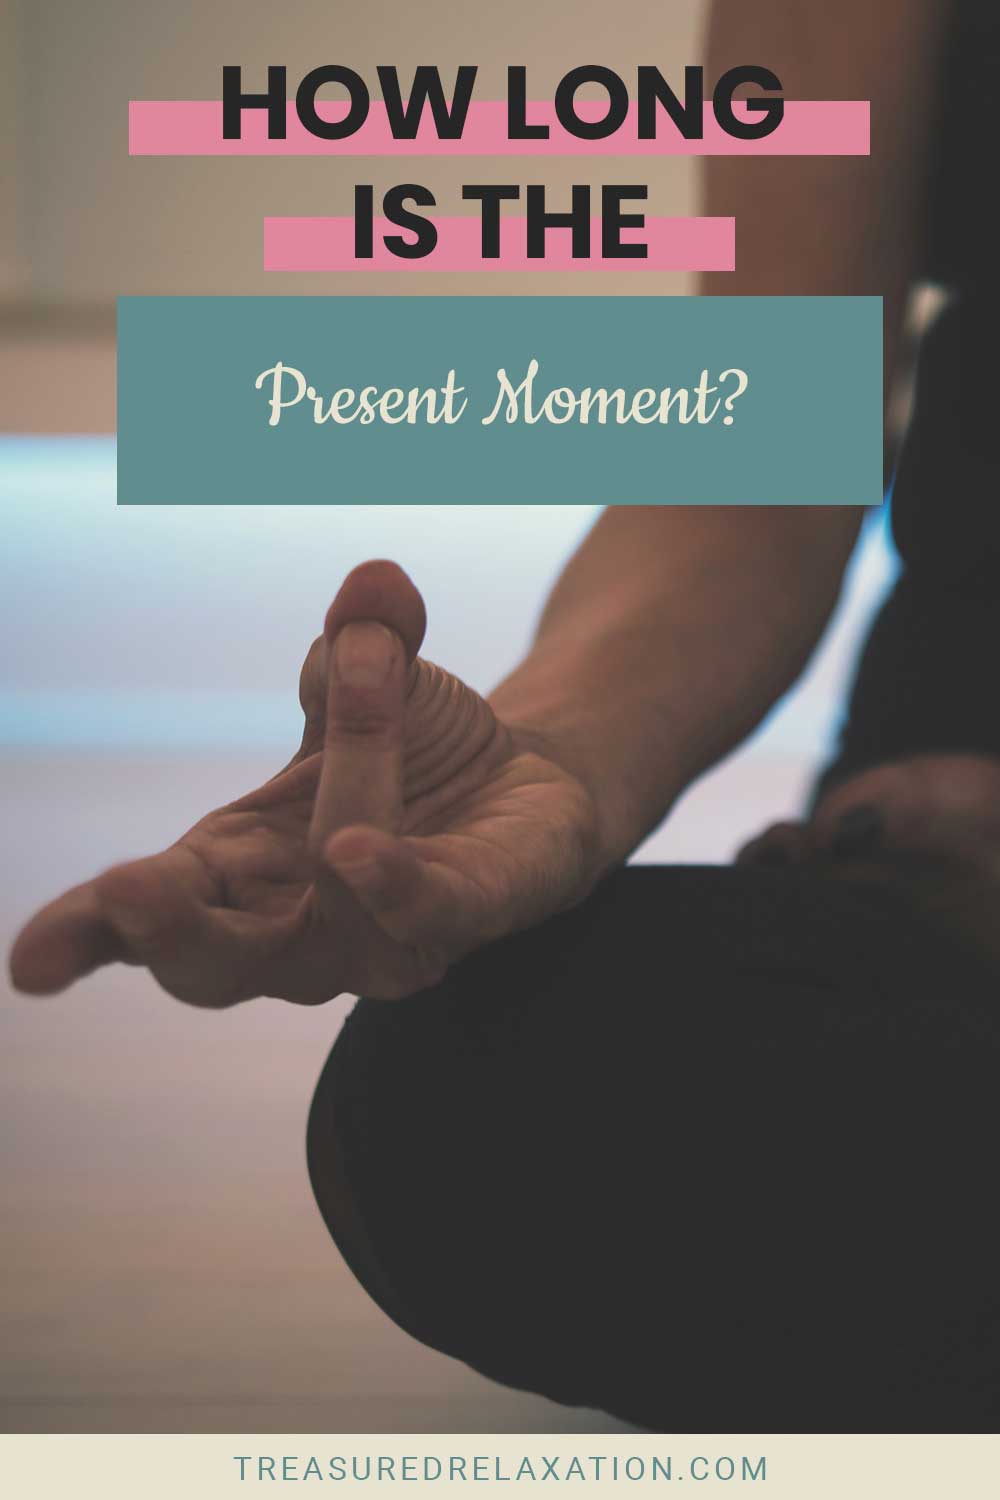 Hand mudra of a meditating person - How Long is the Present Moment?